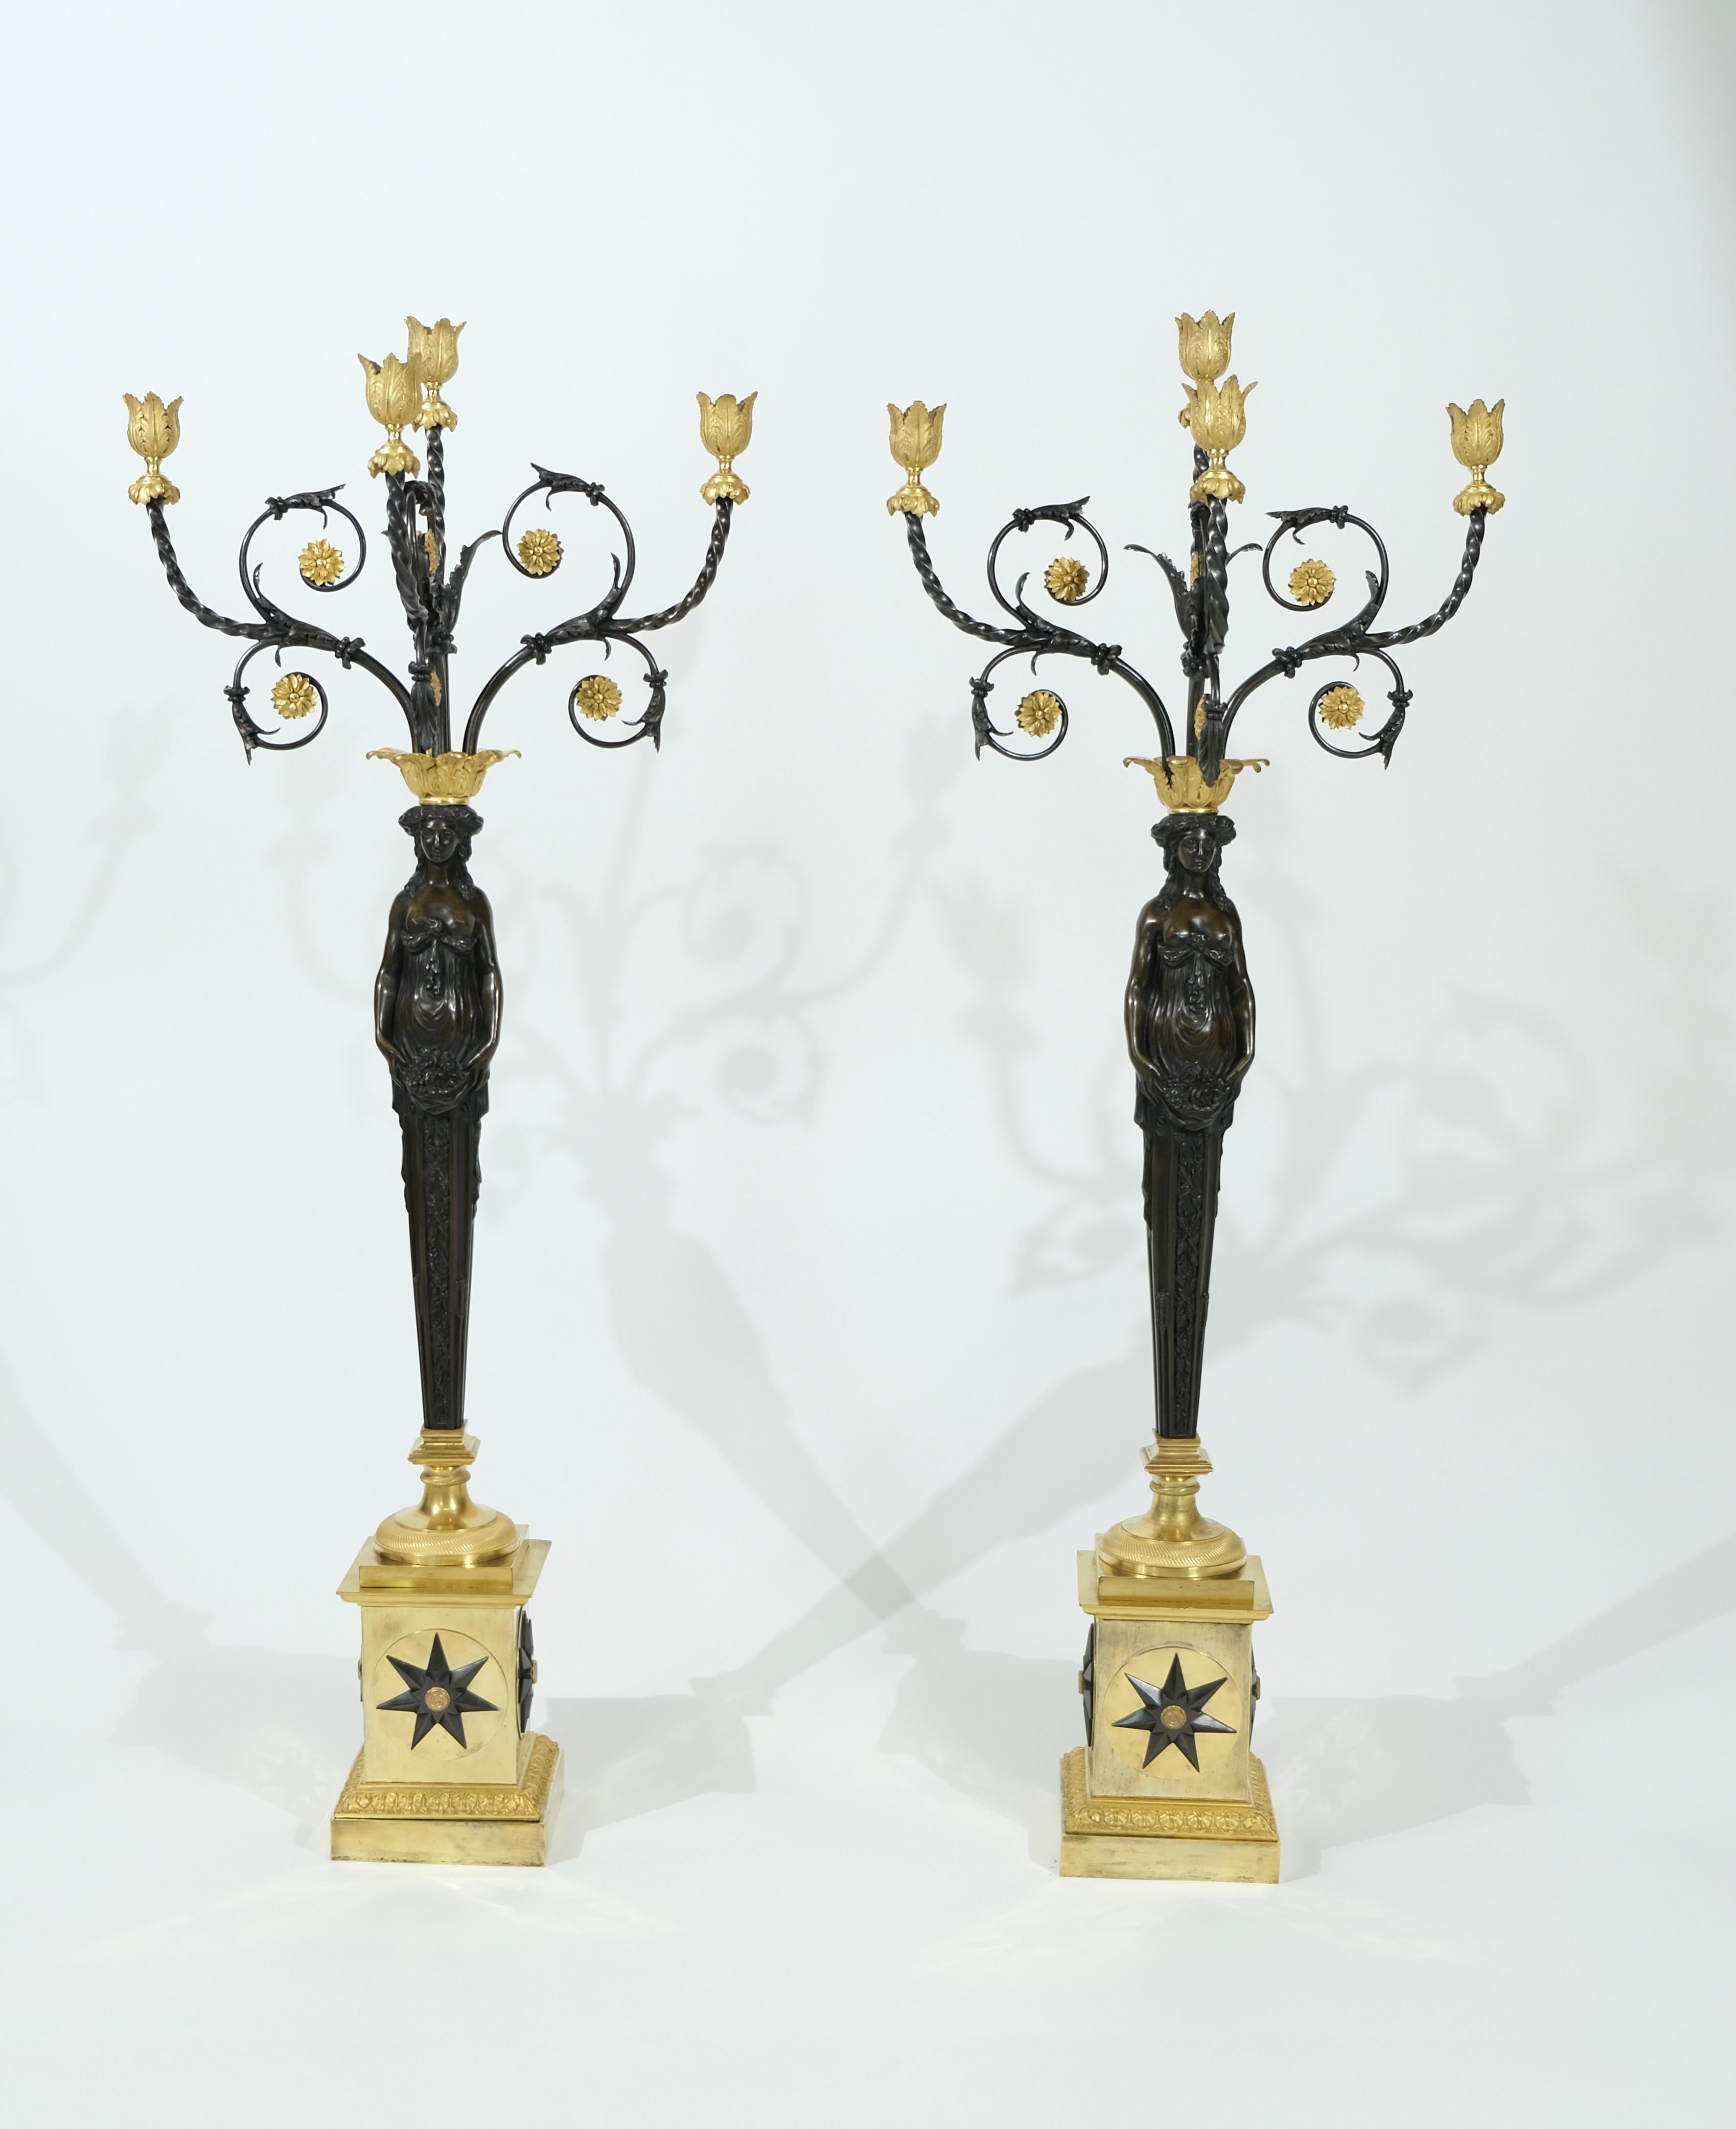 A pair of gilt and black patinated bronze candelabra, 99 cm high. This is a unusual model with tall blackpatinated goddesses holding four arms with candleholders on their heads. The quality of the casting is very high and the proportions beautiful.